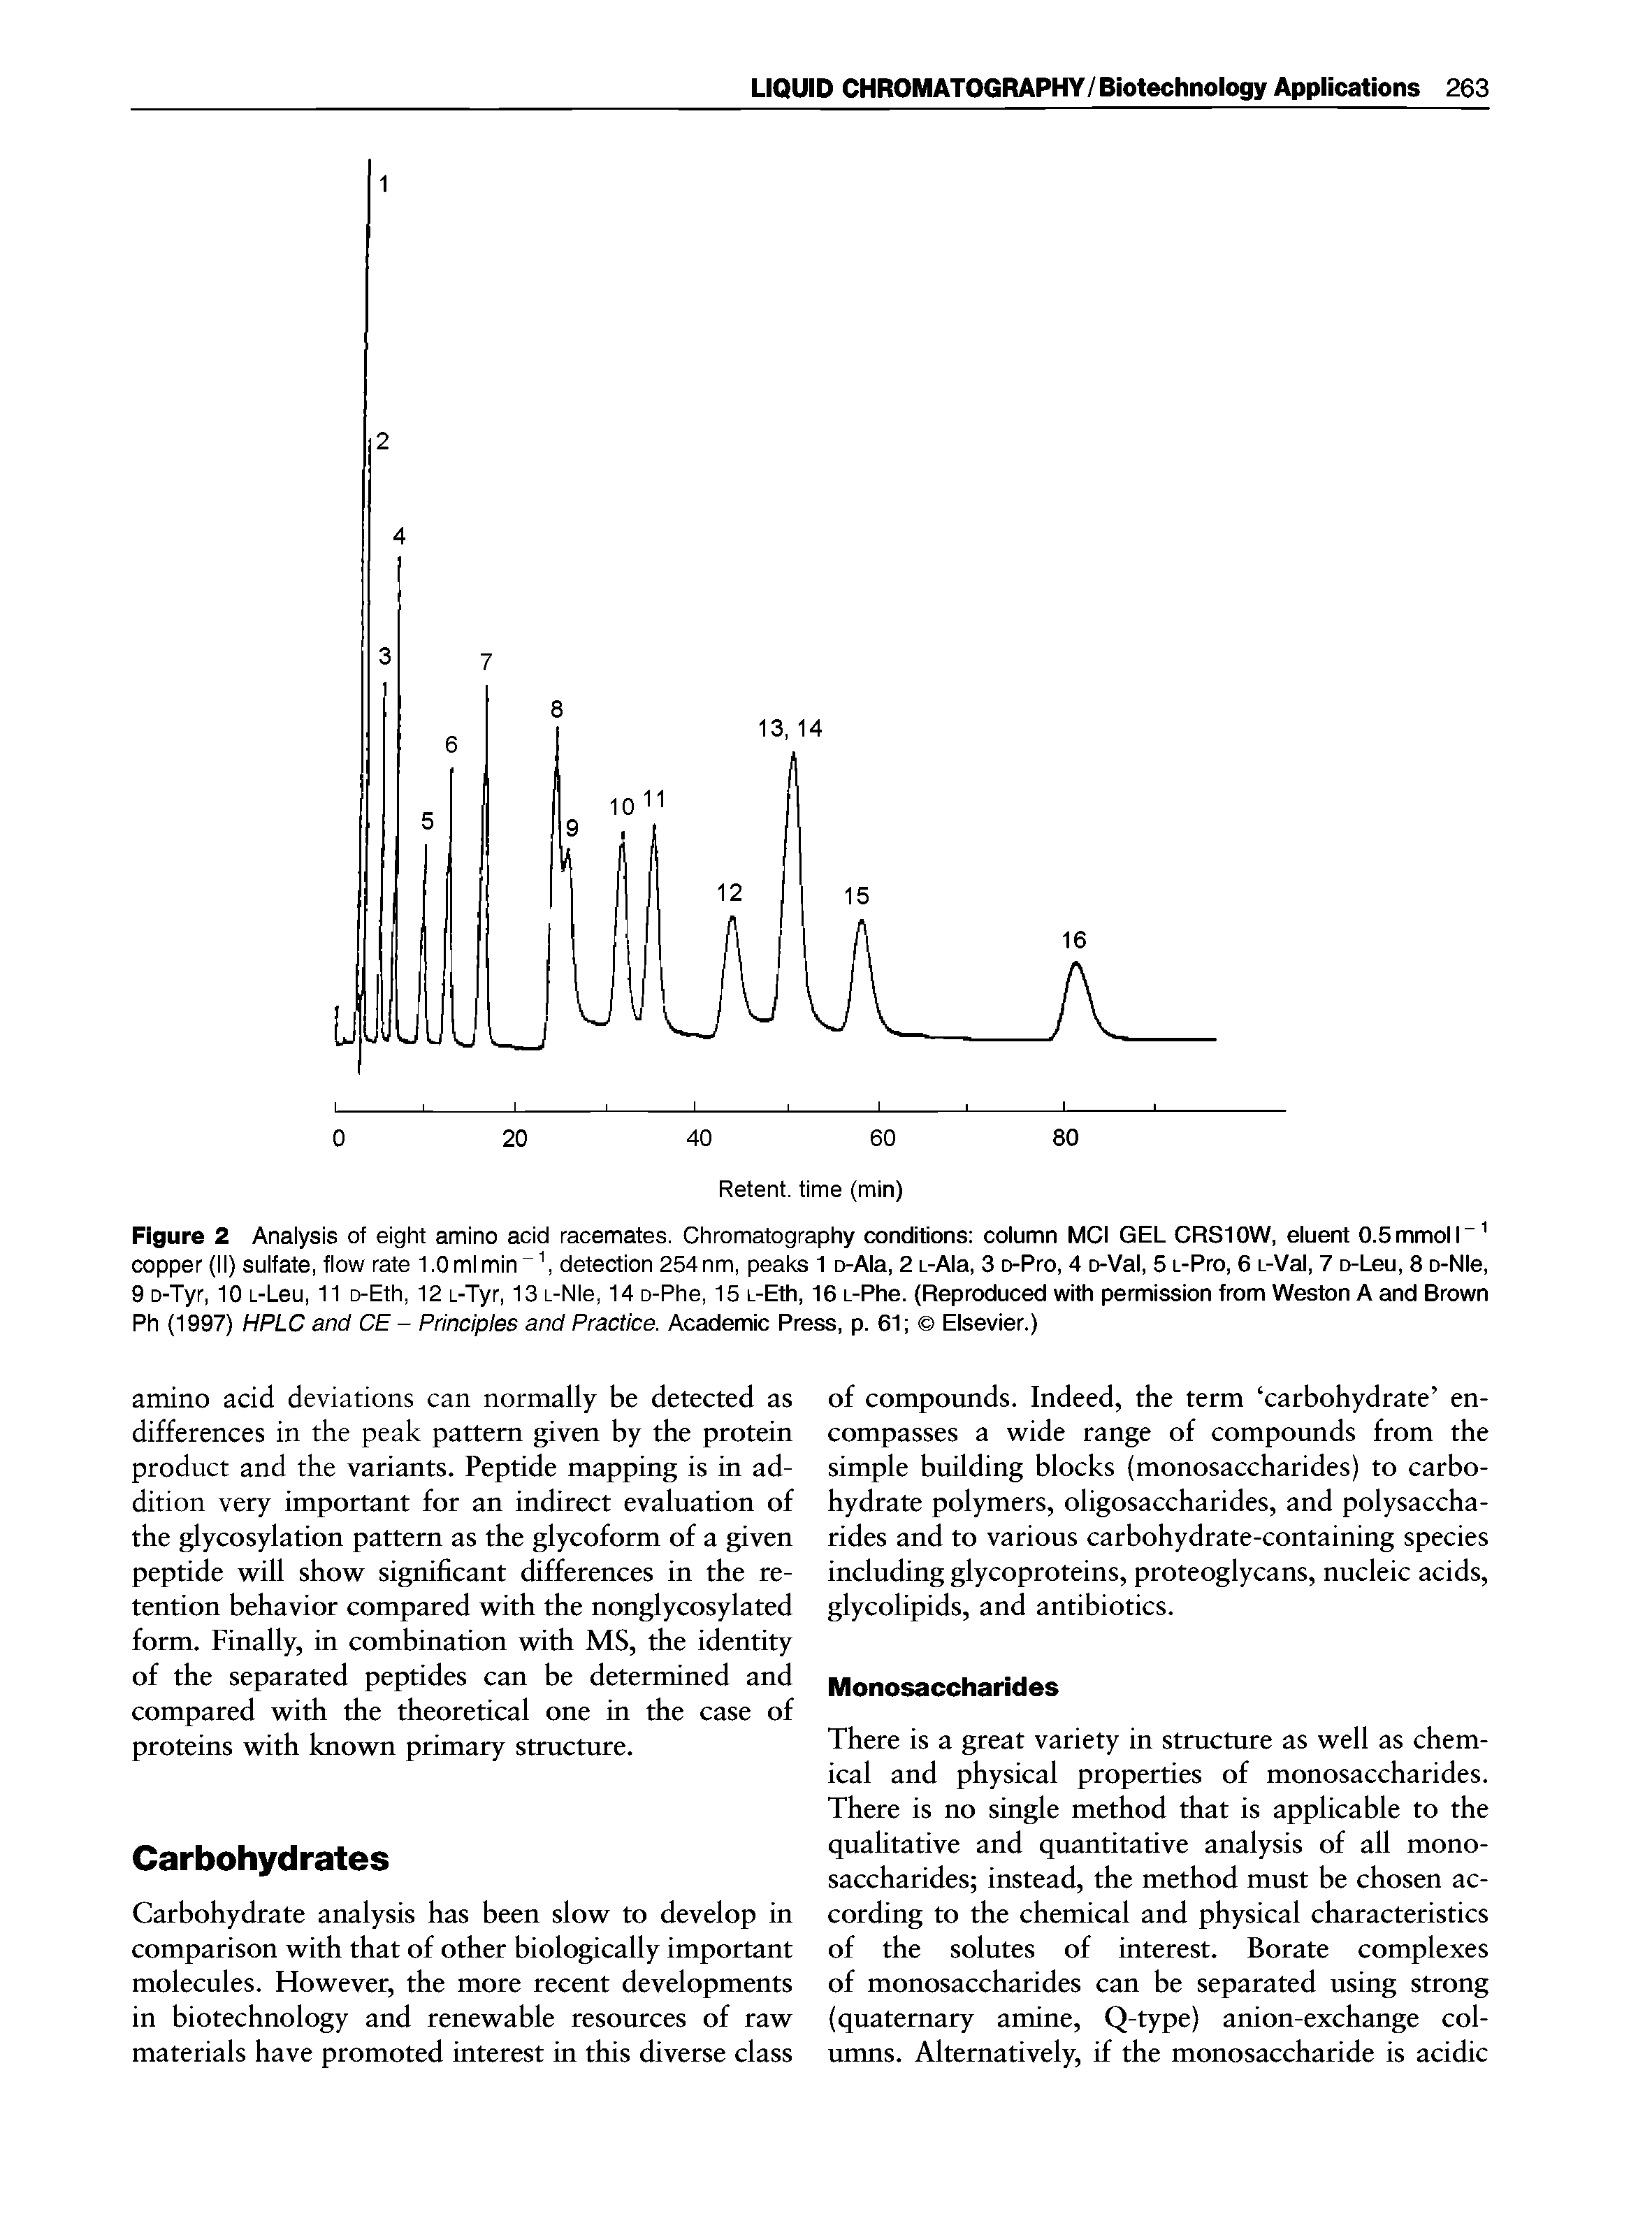 Figure 2 Analysis of eight amino acid racemates. Chromatography conditions column MCI GEL CRS10W, eluent O.Smmoir copper (II) sulfate, flow rate 1.0 ml min , detection 254 nm, peaks 1 o-Ala, 2 i-Ala, 3 o-Pro, 4 o-Val, 5 L-Pro, 6 L-Val, 7 o-Leu, 8 o-NIe, 9 D-Tyr, lOi-Leu, 11 o-Eth, 12i-Tyr, 13L-Nle, 14o-Phe, 15L-Eth, 16L-Phe. (Reproduced with permission from Weston A and Brown Ph (1997) HPLC and CE - Principles and Practice. Academic Press, p. 61 Eisevier.)...